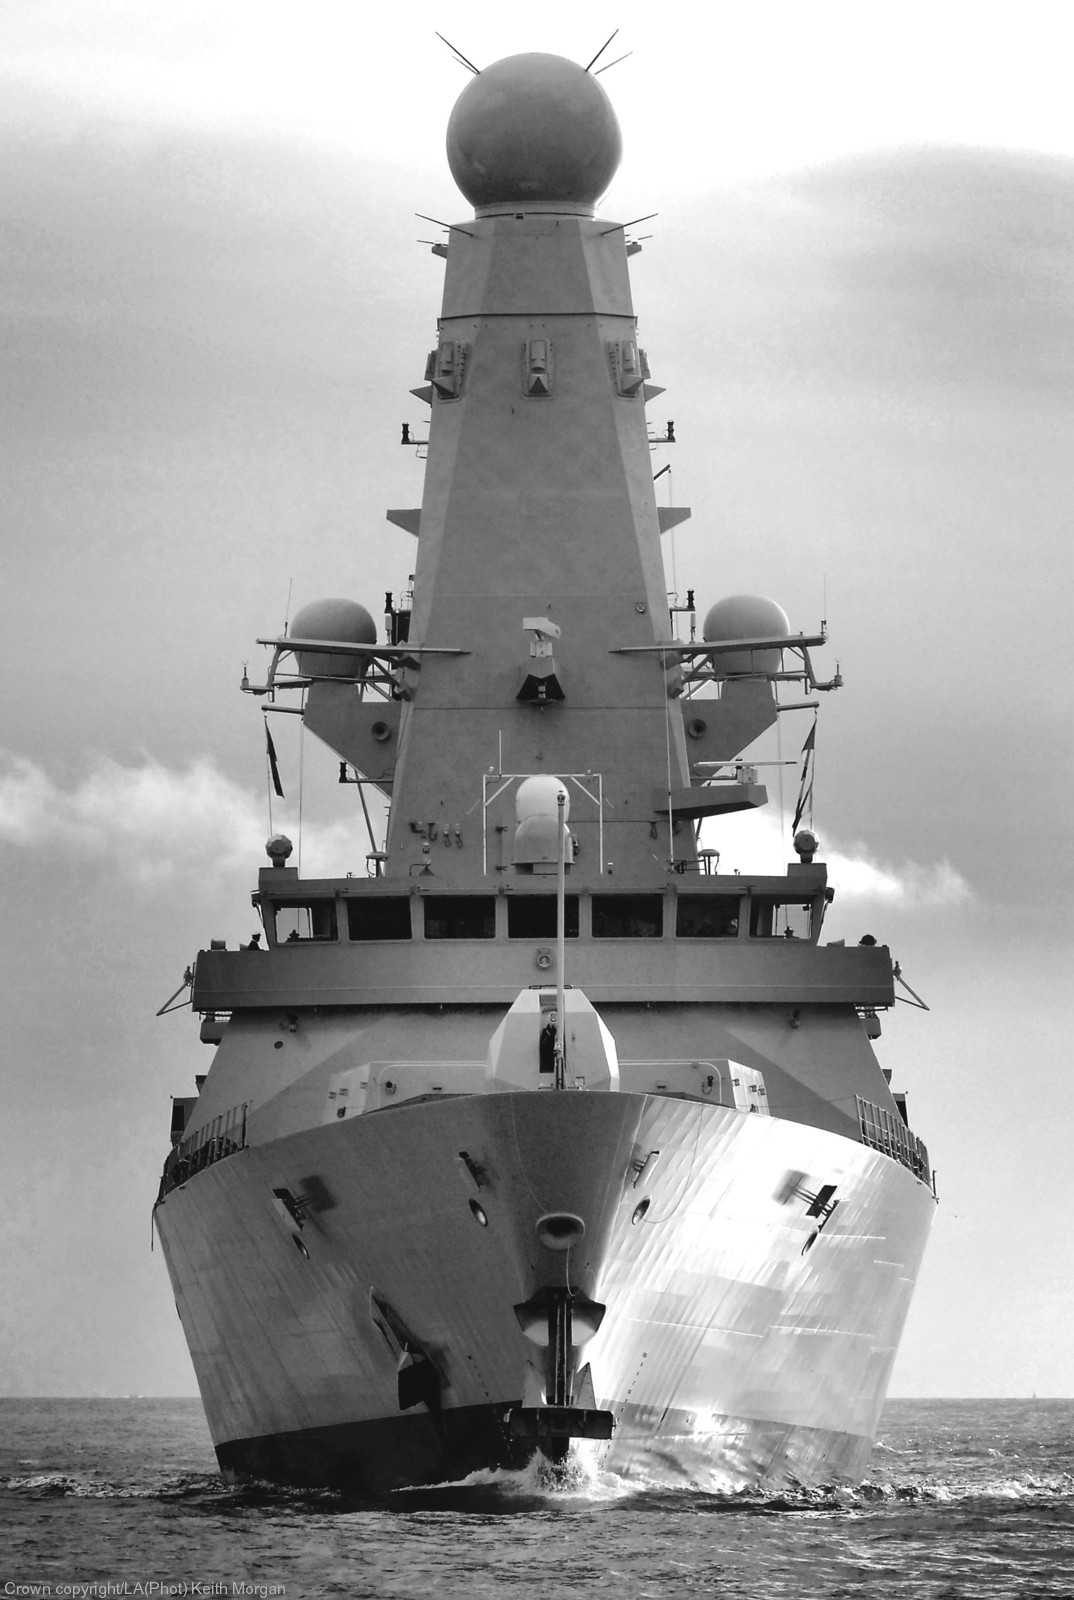 hms dauntless d-33 type 45 daring class guided missile destroyer royal navy sea viper paams 15